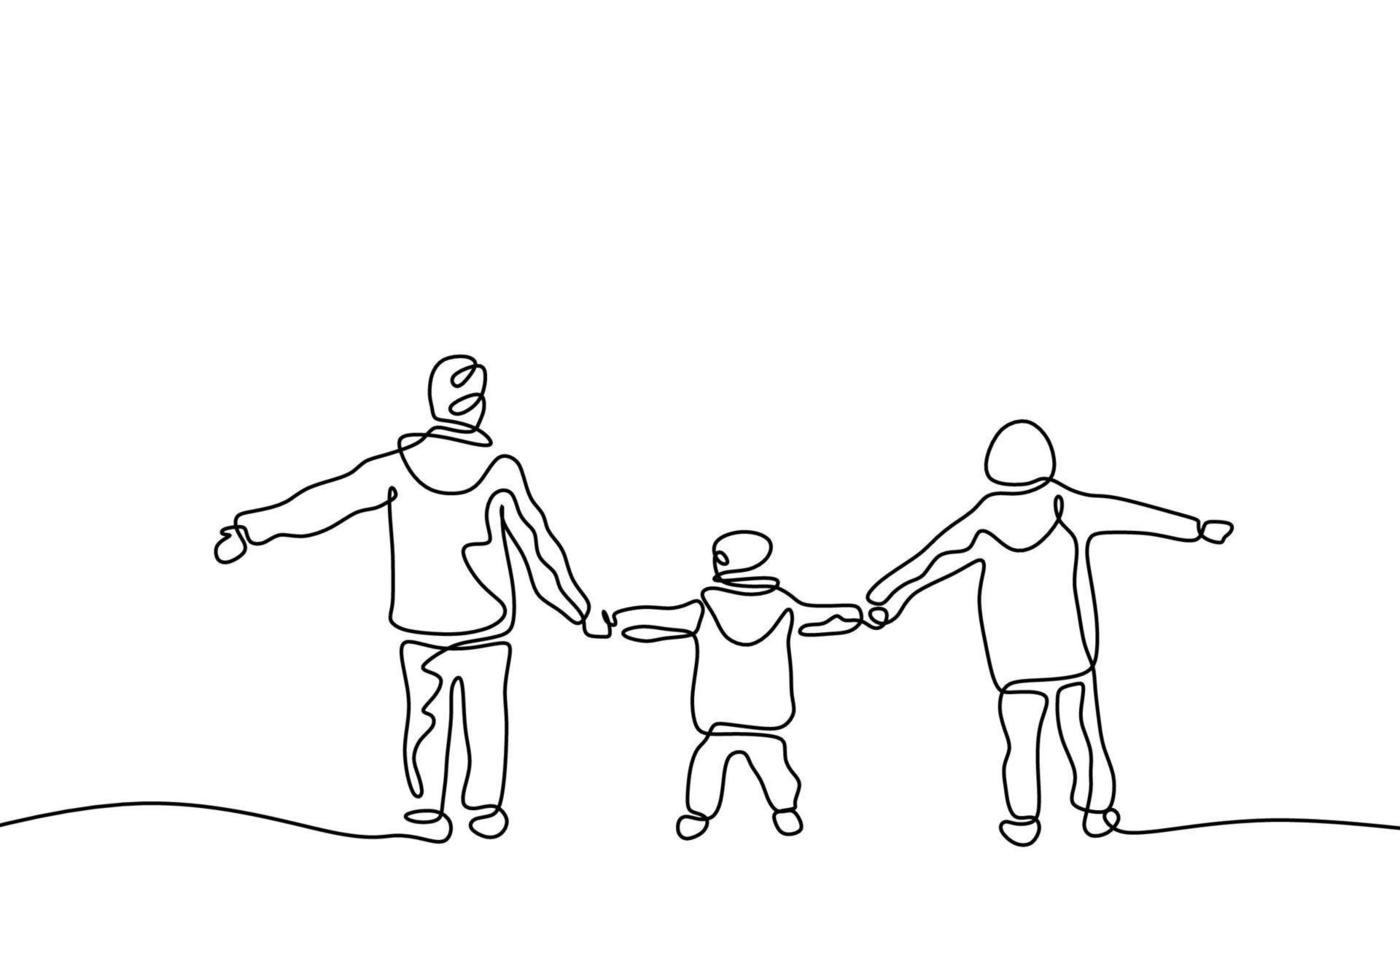 Continuous one line drawing of three kids holding hands and playing. Childhood act of kindness theme. Children concept of brother and sister member vector